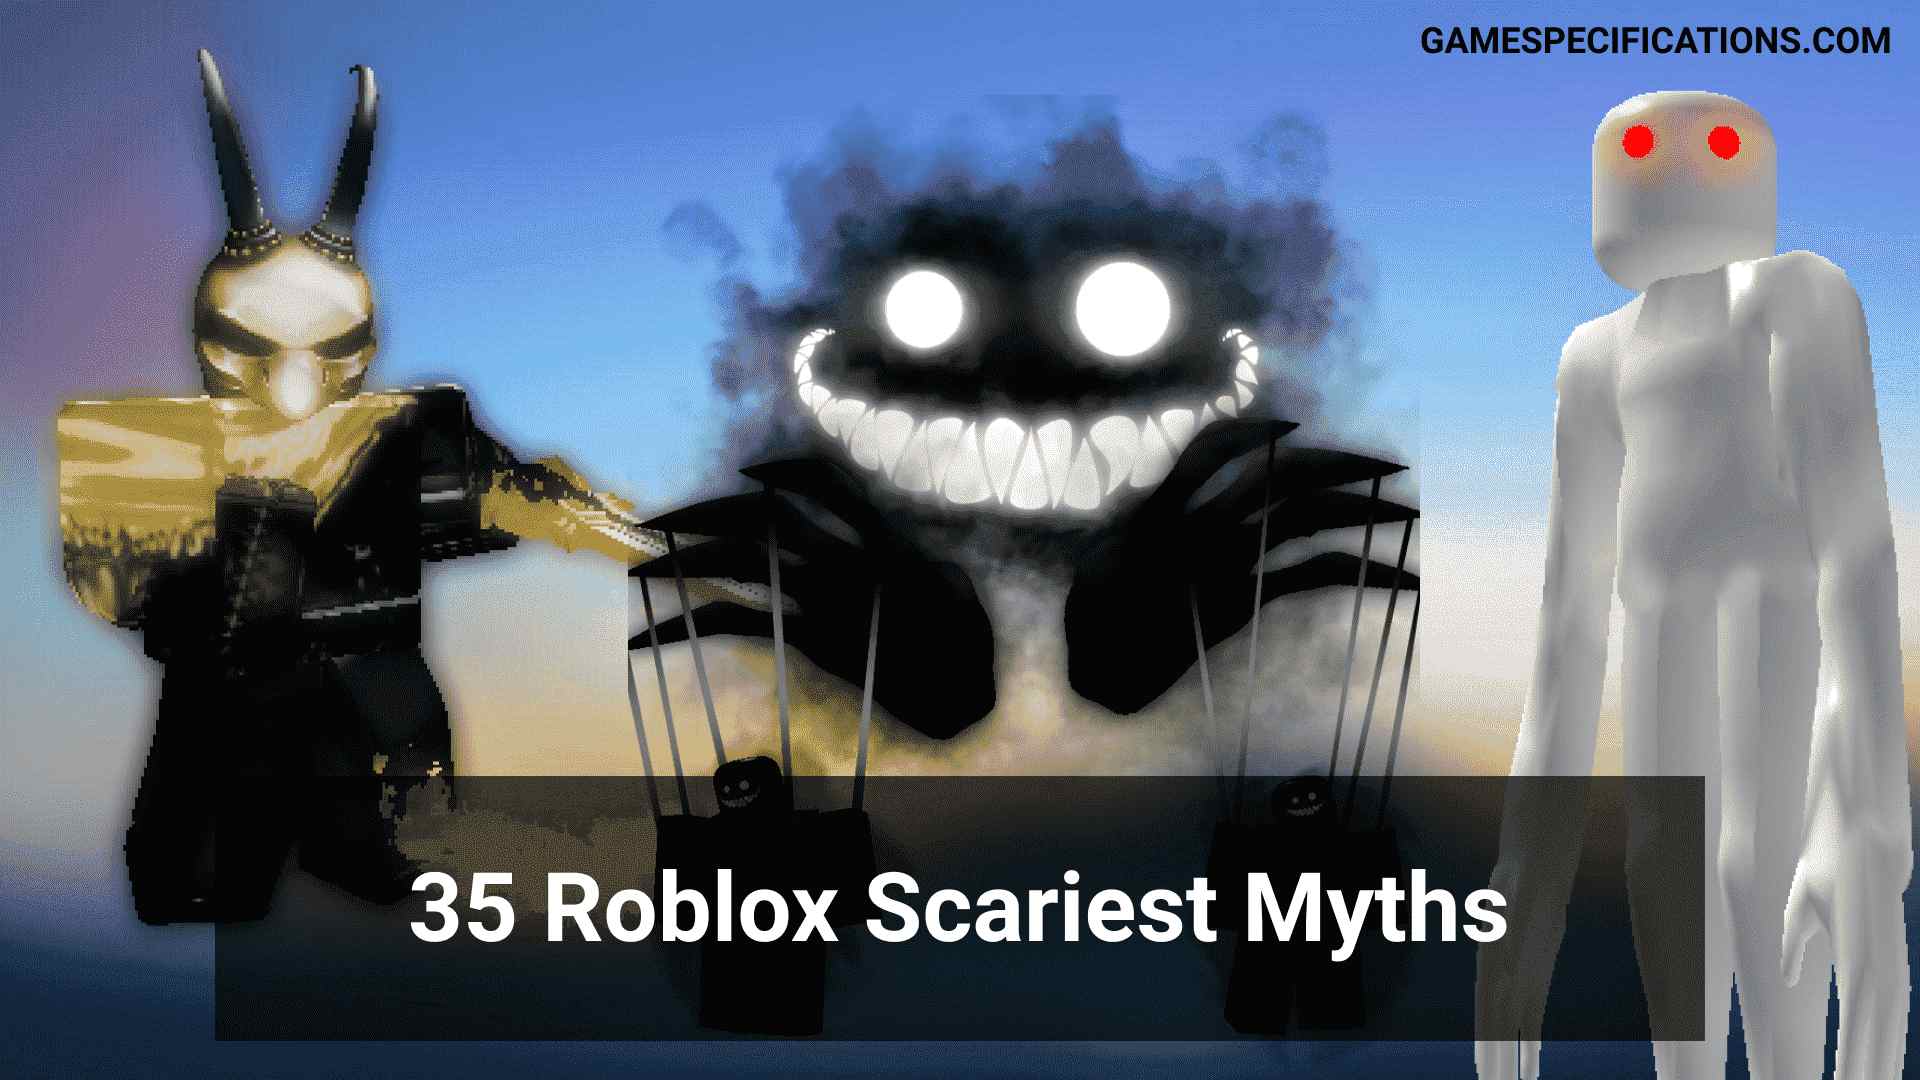 Roblox Myths A Scary Universe Of Roblox Game Specifications - orenen roblox myth